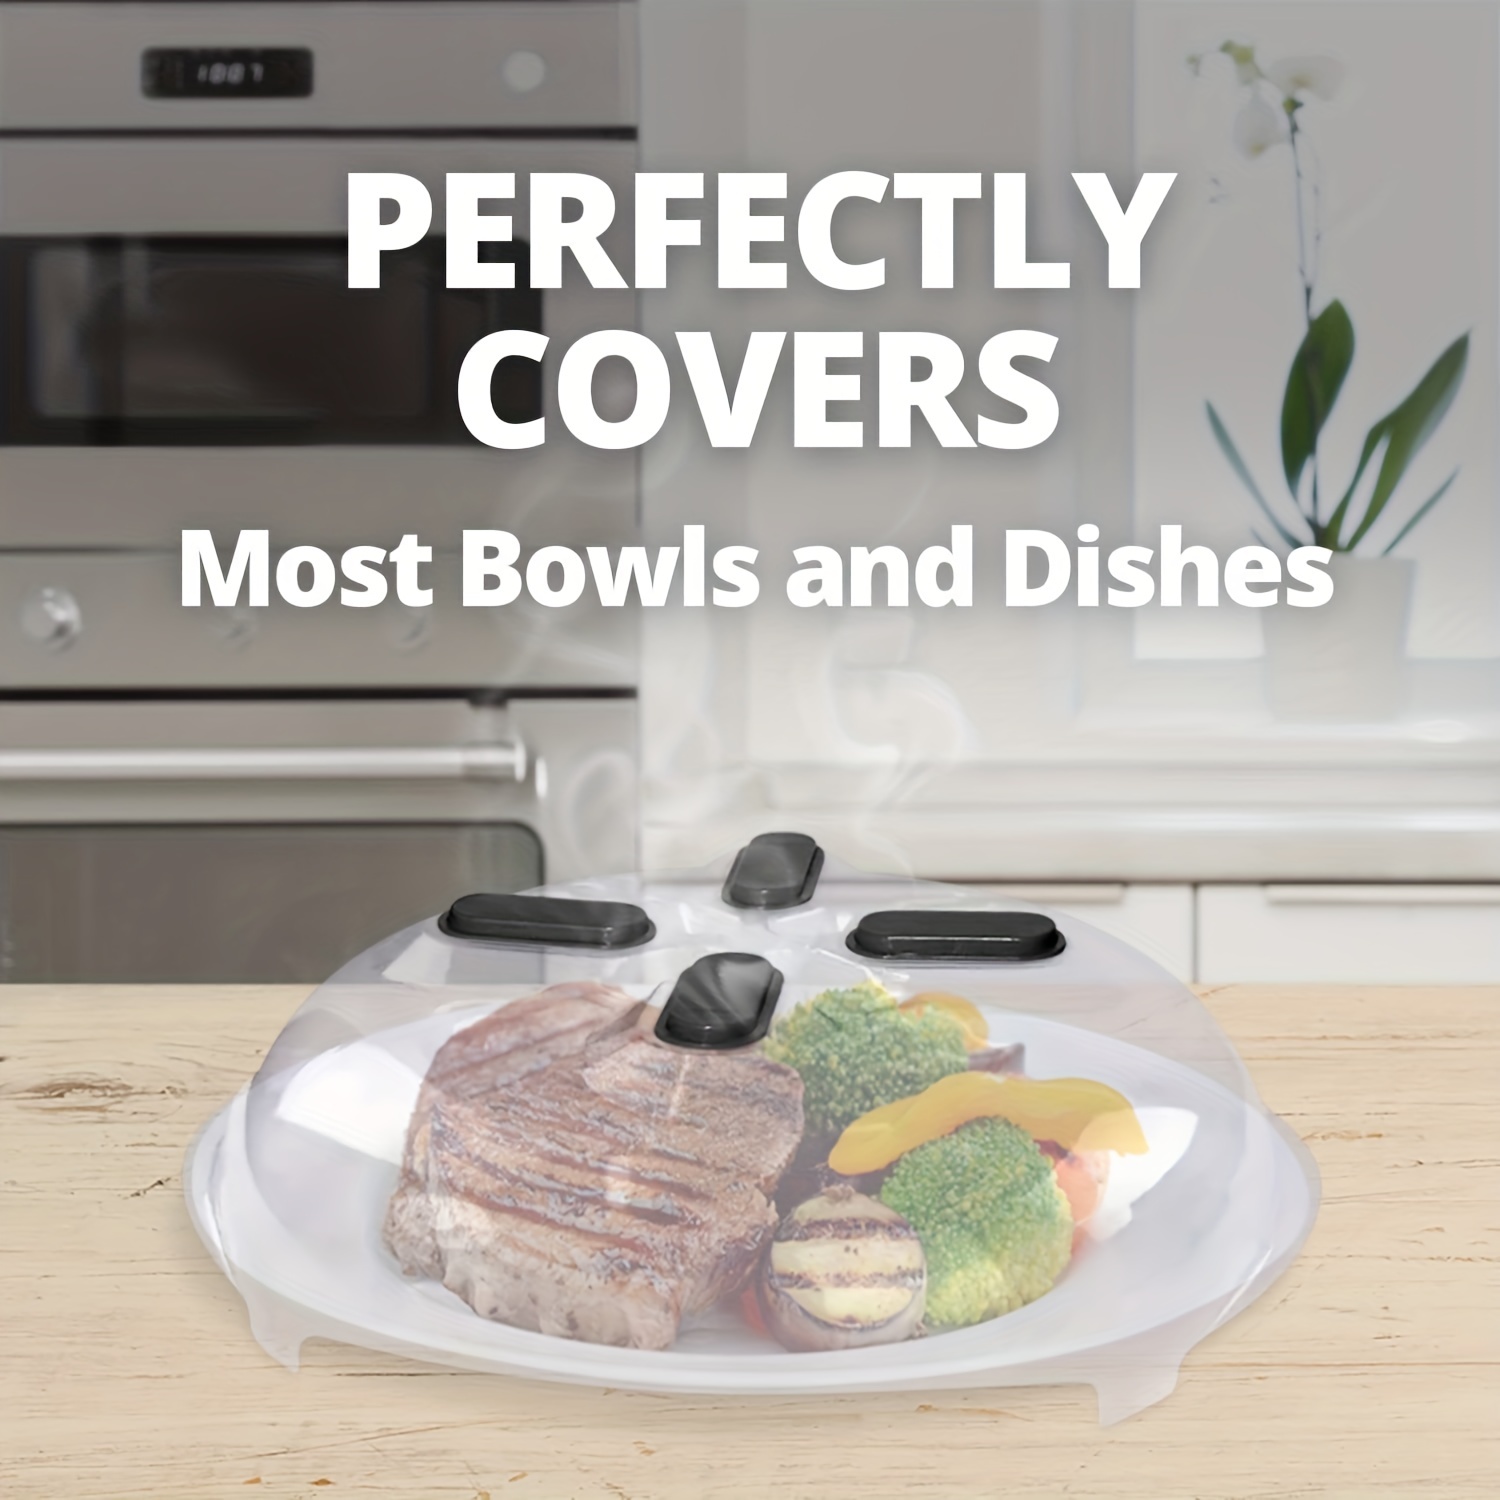 1pc Anti-splash Magnetic Microwave Cover, Multifunctional Foldable